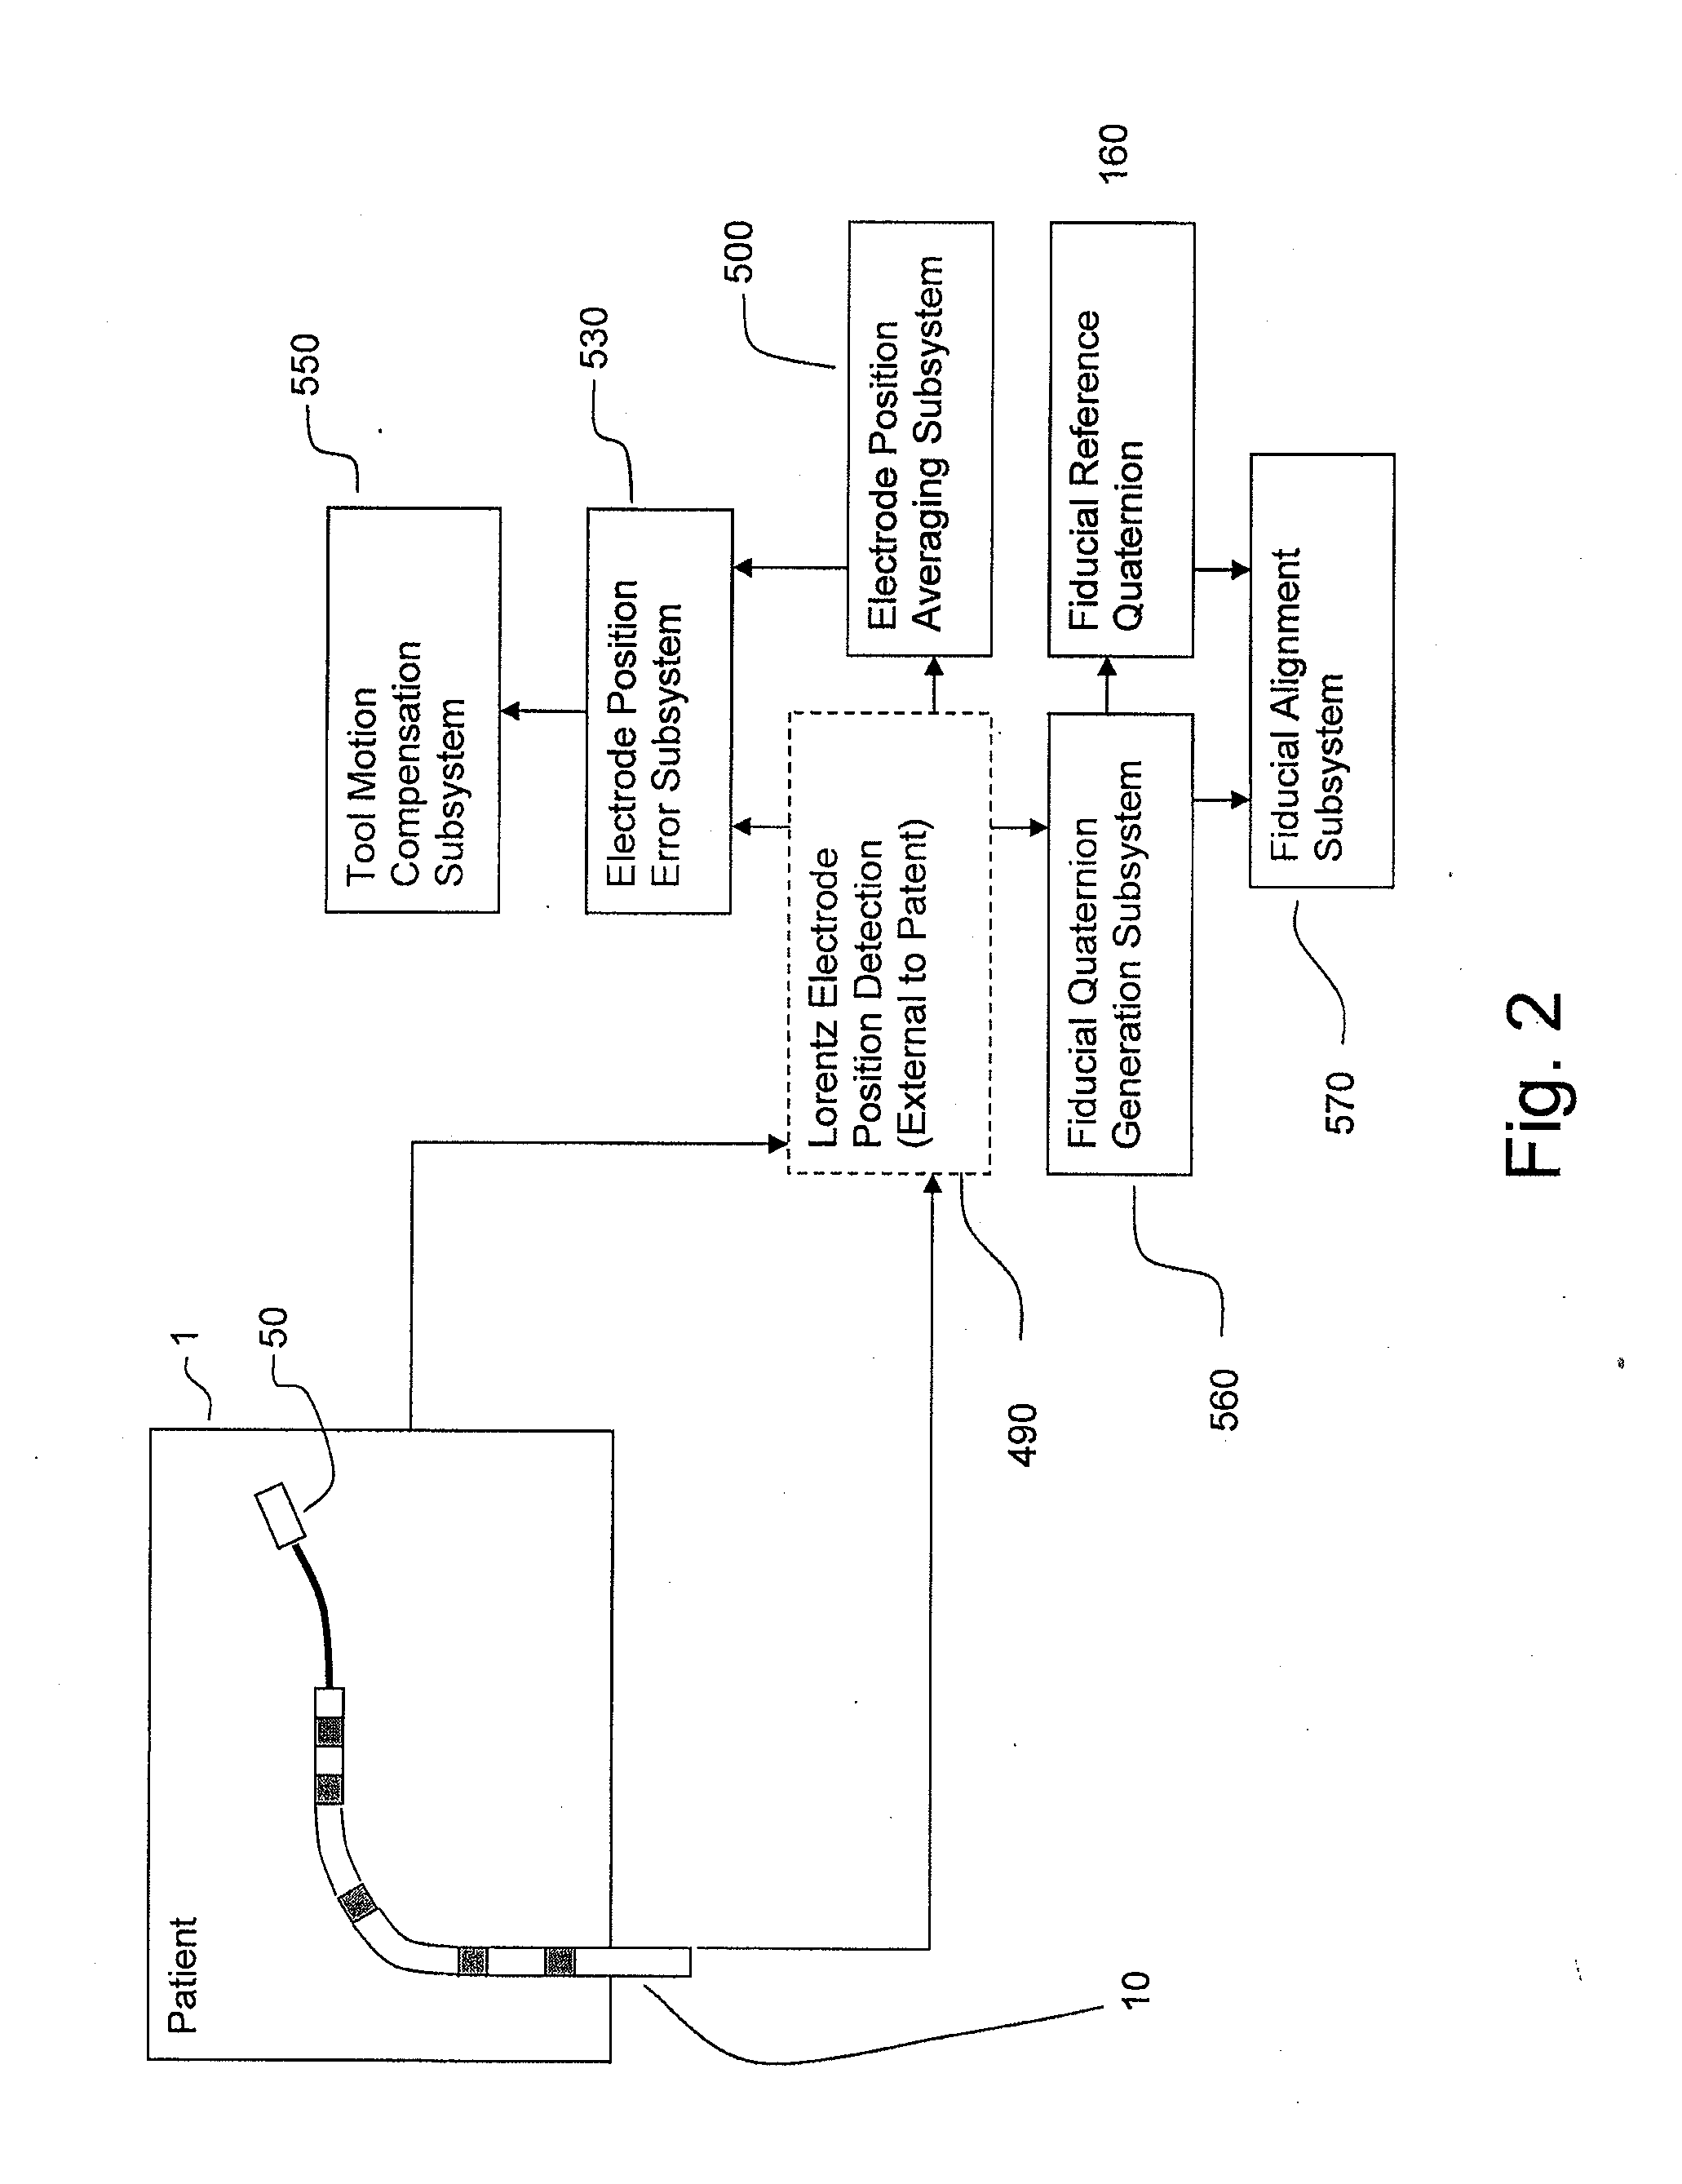 Apparatus and method for lorentz-active sheath display and control of surgical tools